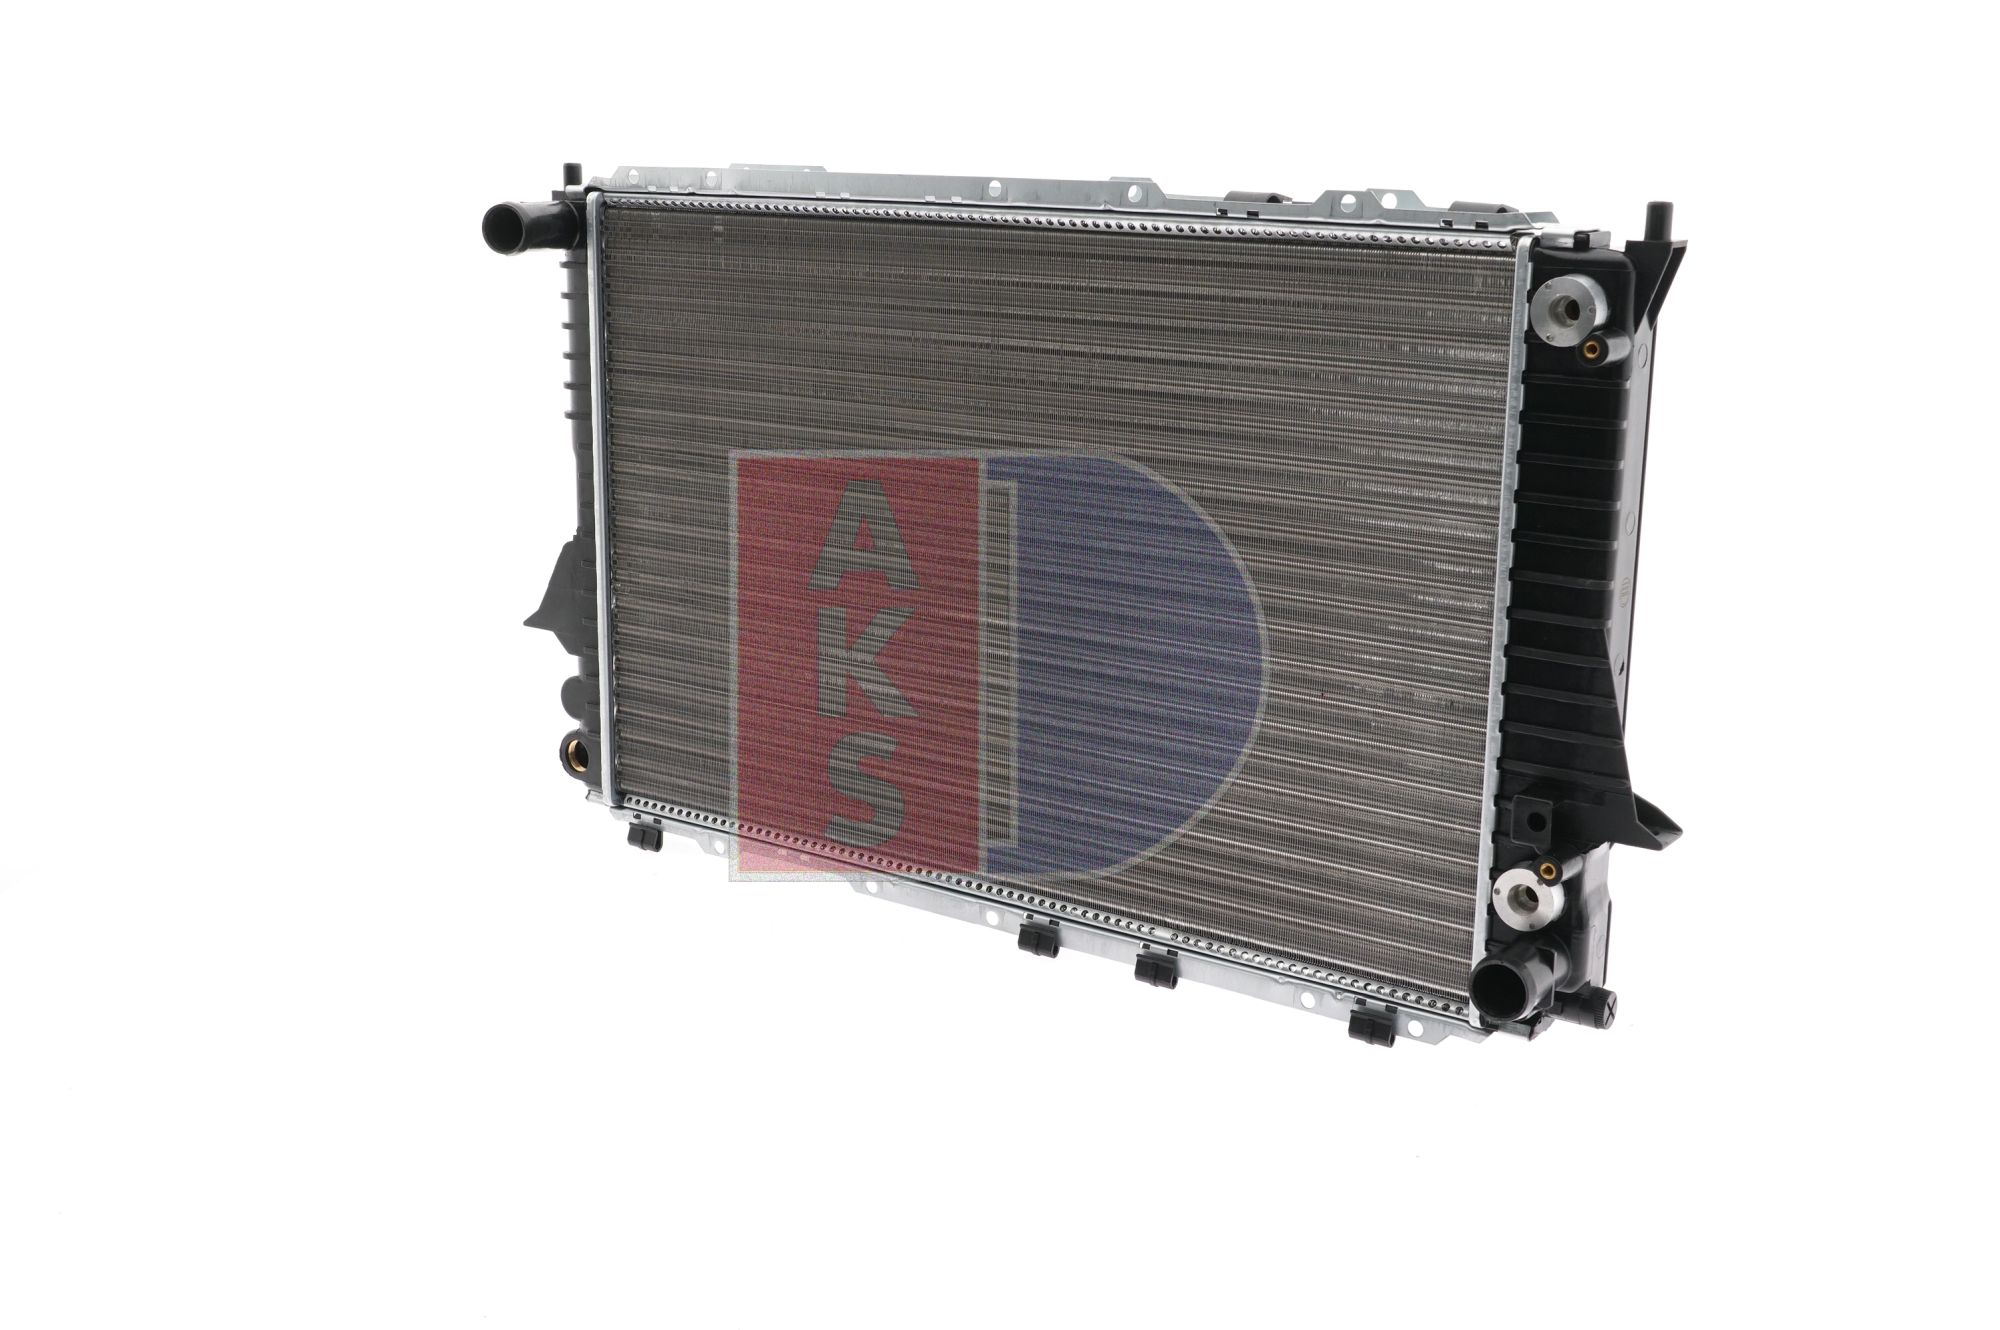 AKS DASIS 481170N Engine radiator 632 x 411 x 30 mm, Mechanically jointed cooling fins